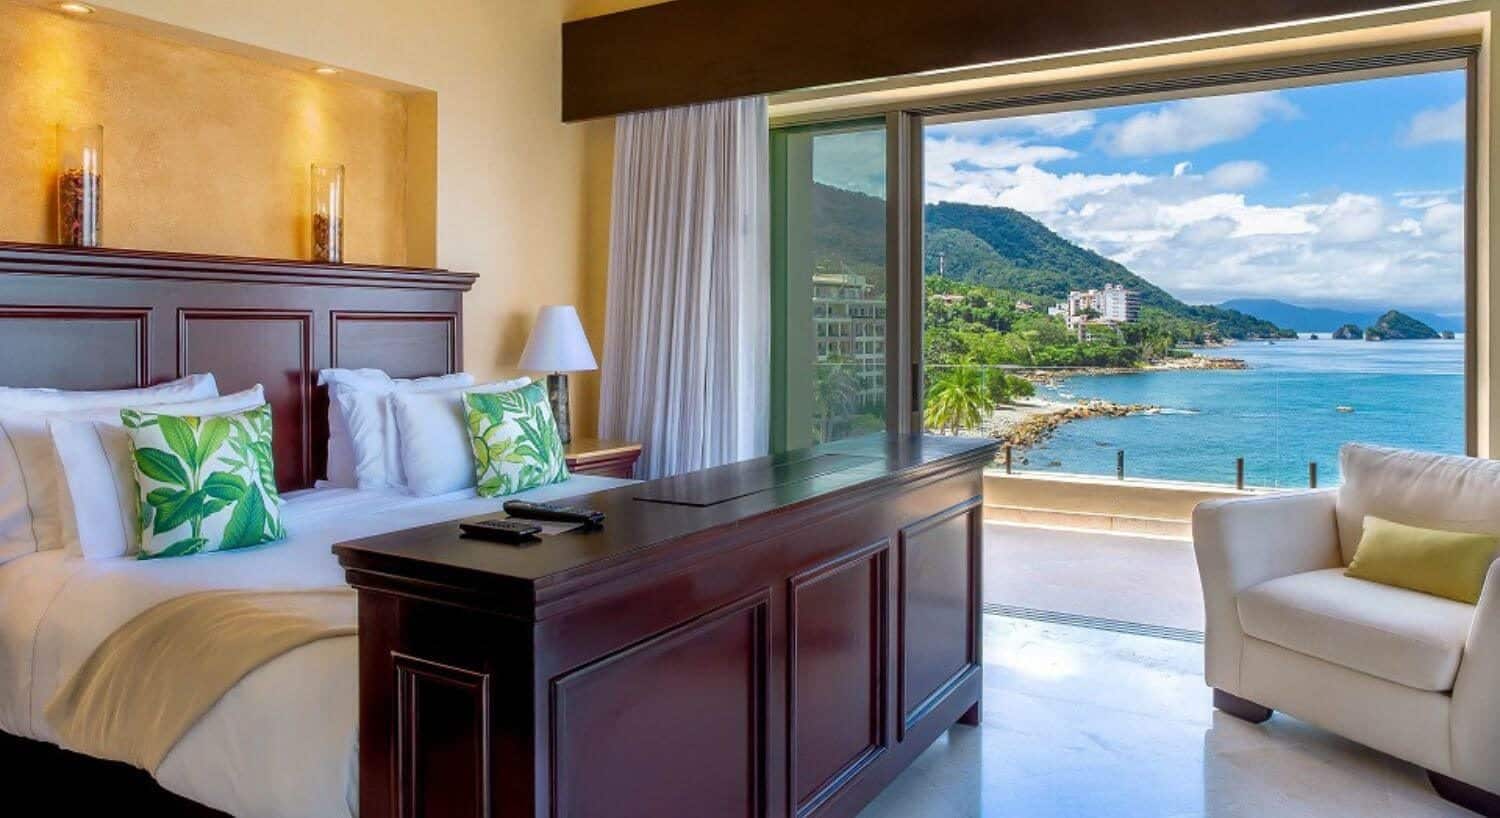 A bedroom with a King bed with wood headboard and footboard, plush armchair, and open sliding doors leading to a balcony with ocean and mountain views.